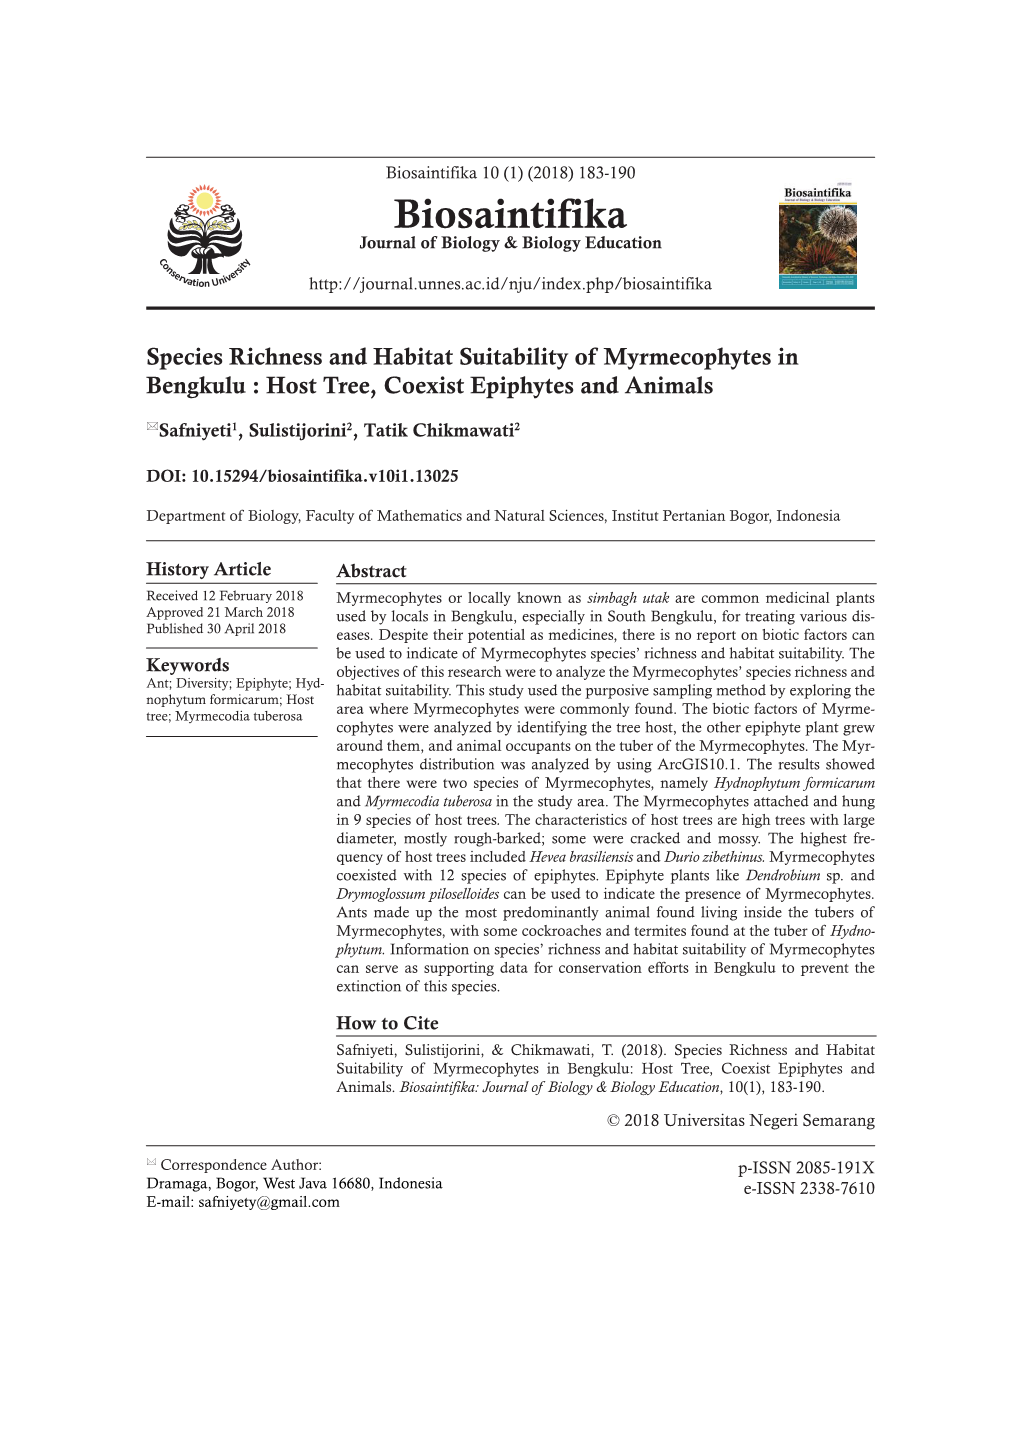 Species Richness and Habitat Suitability of Myrmecophytes in Bengkulu : Host Tree, Coexist Epiphytes and Animals